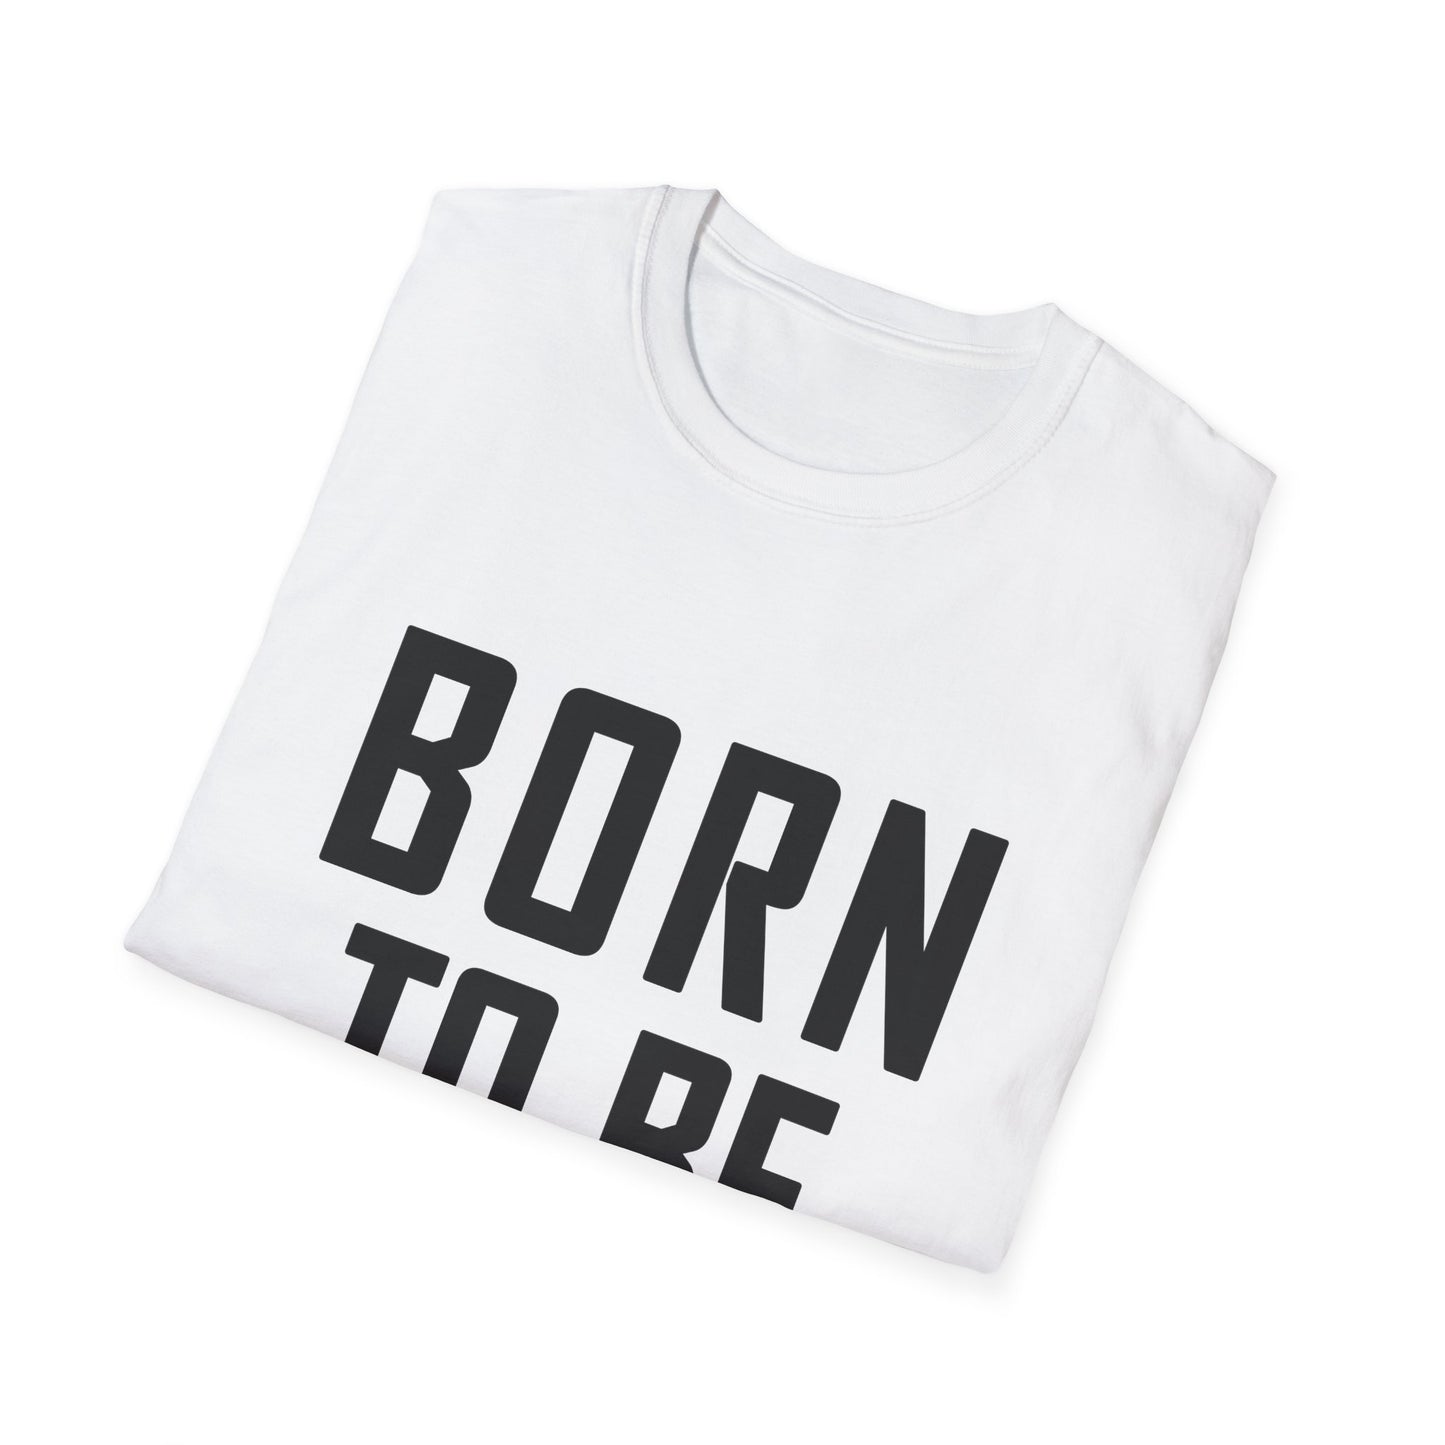 BORN TO BE STRONG Unisex Softstyle T-Shirt